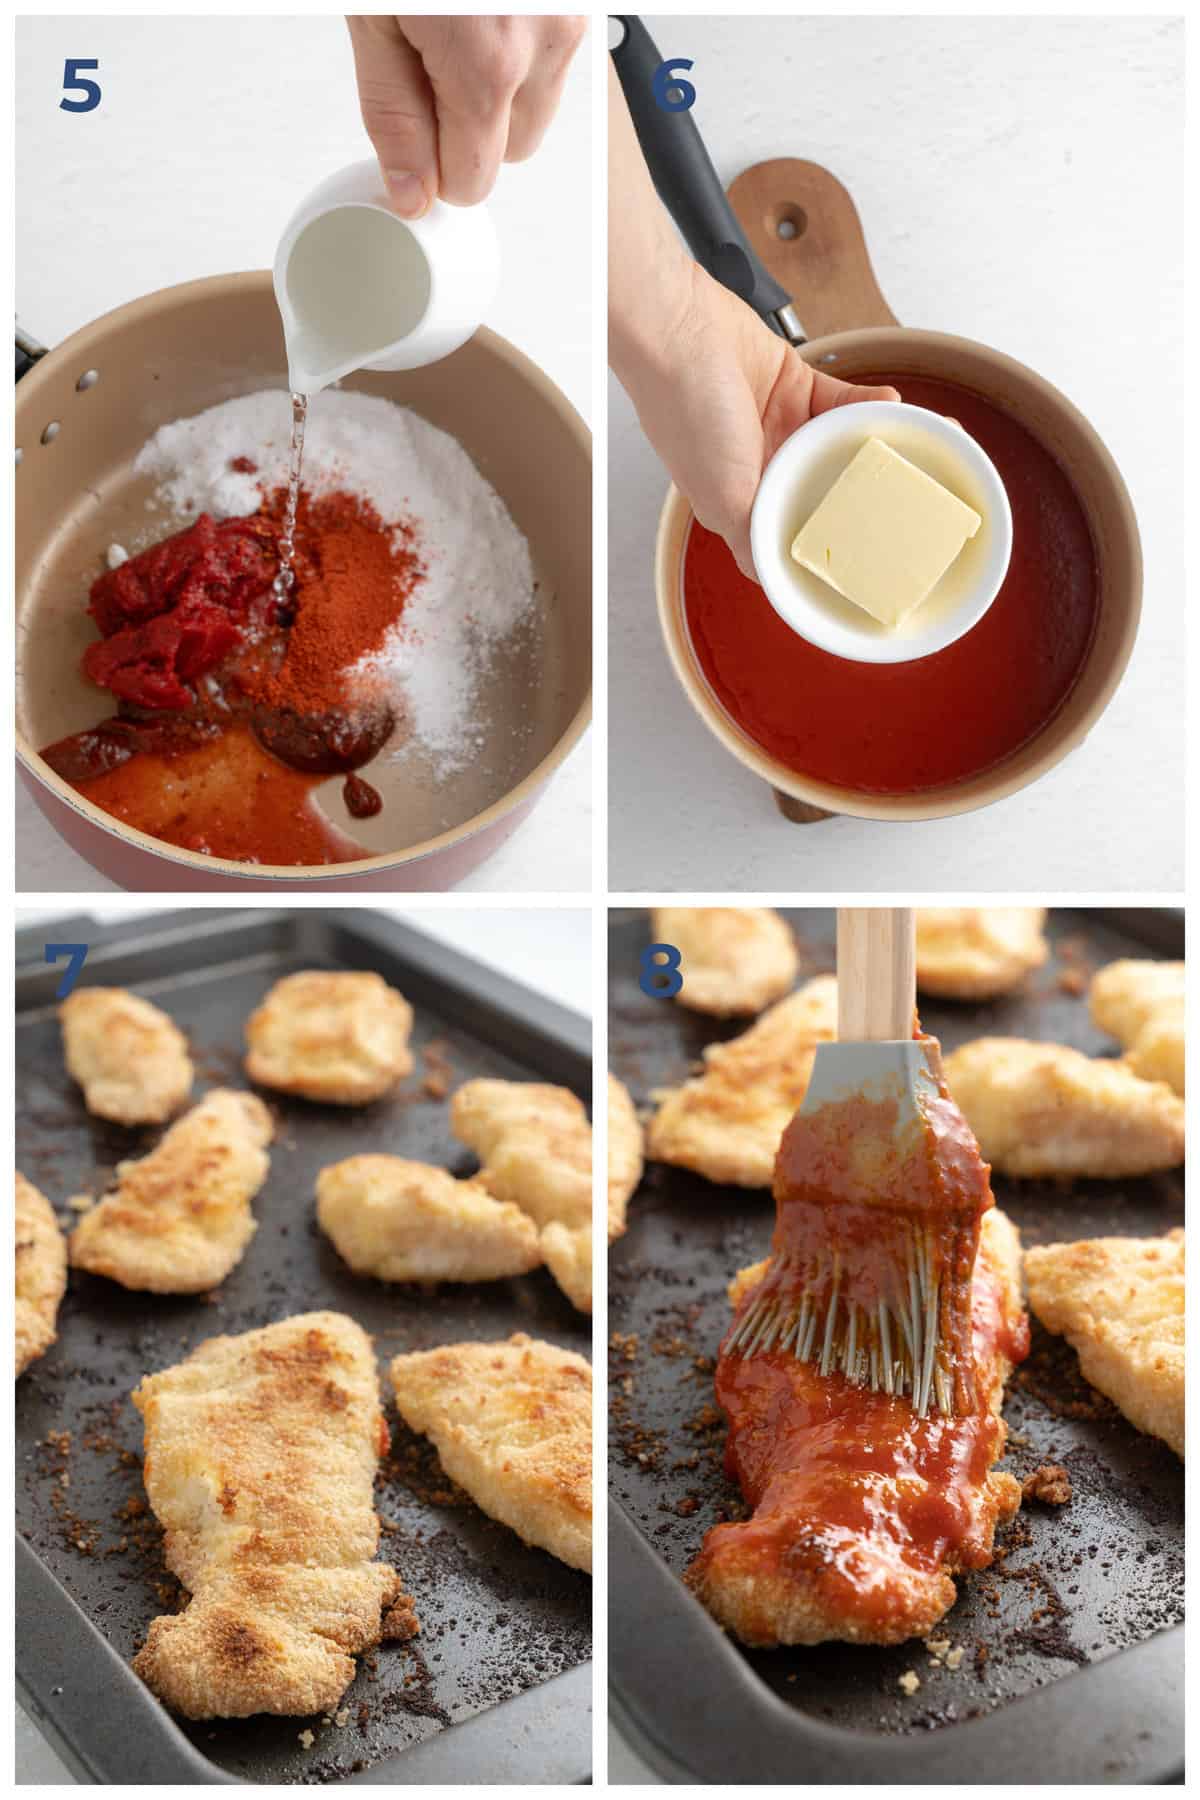 Step by step directions for making a sweet and spicy sauce and tossing chicken tenders in it.